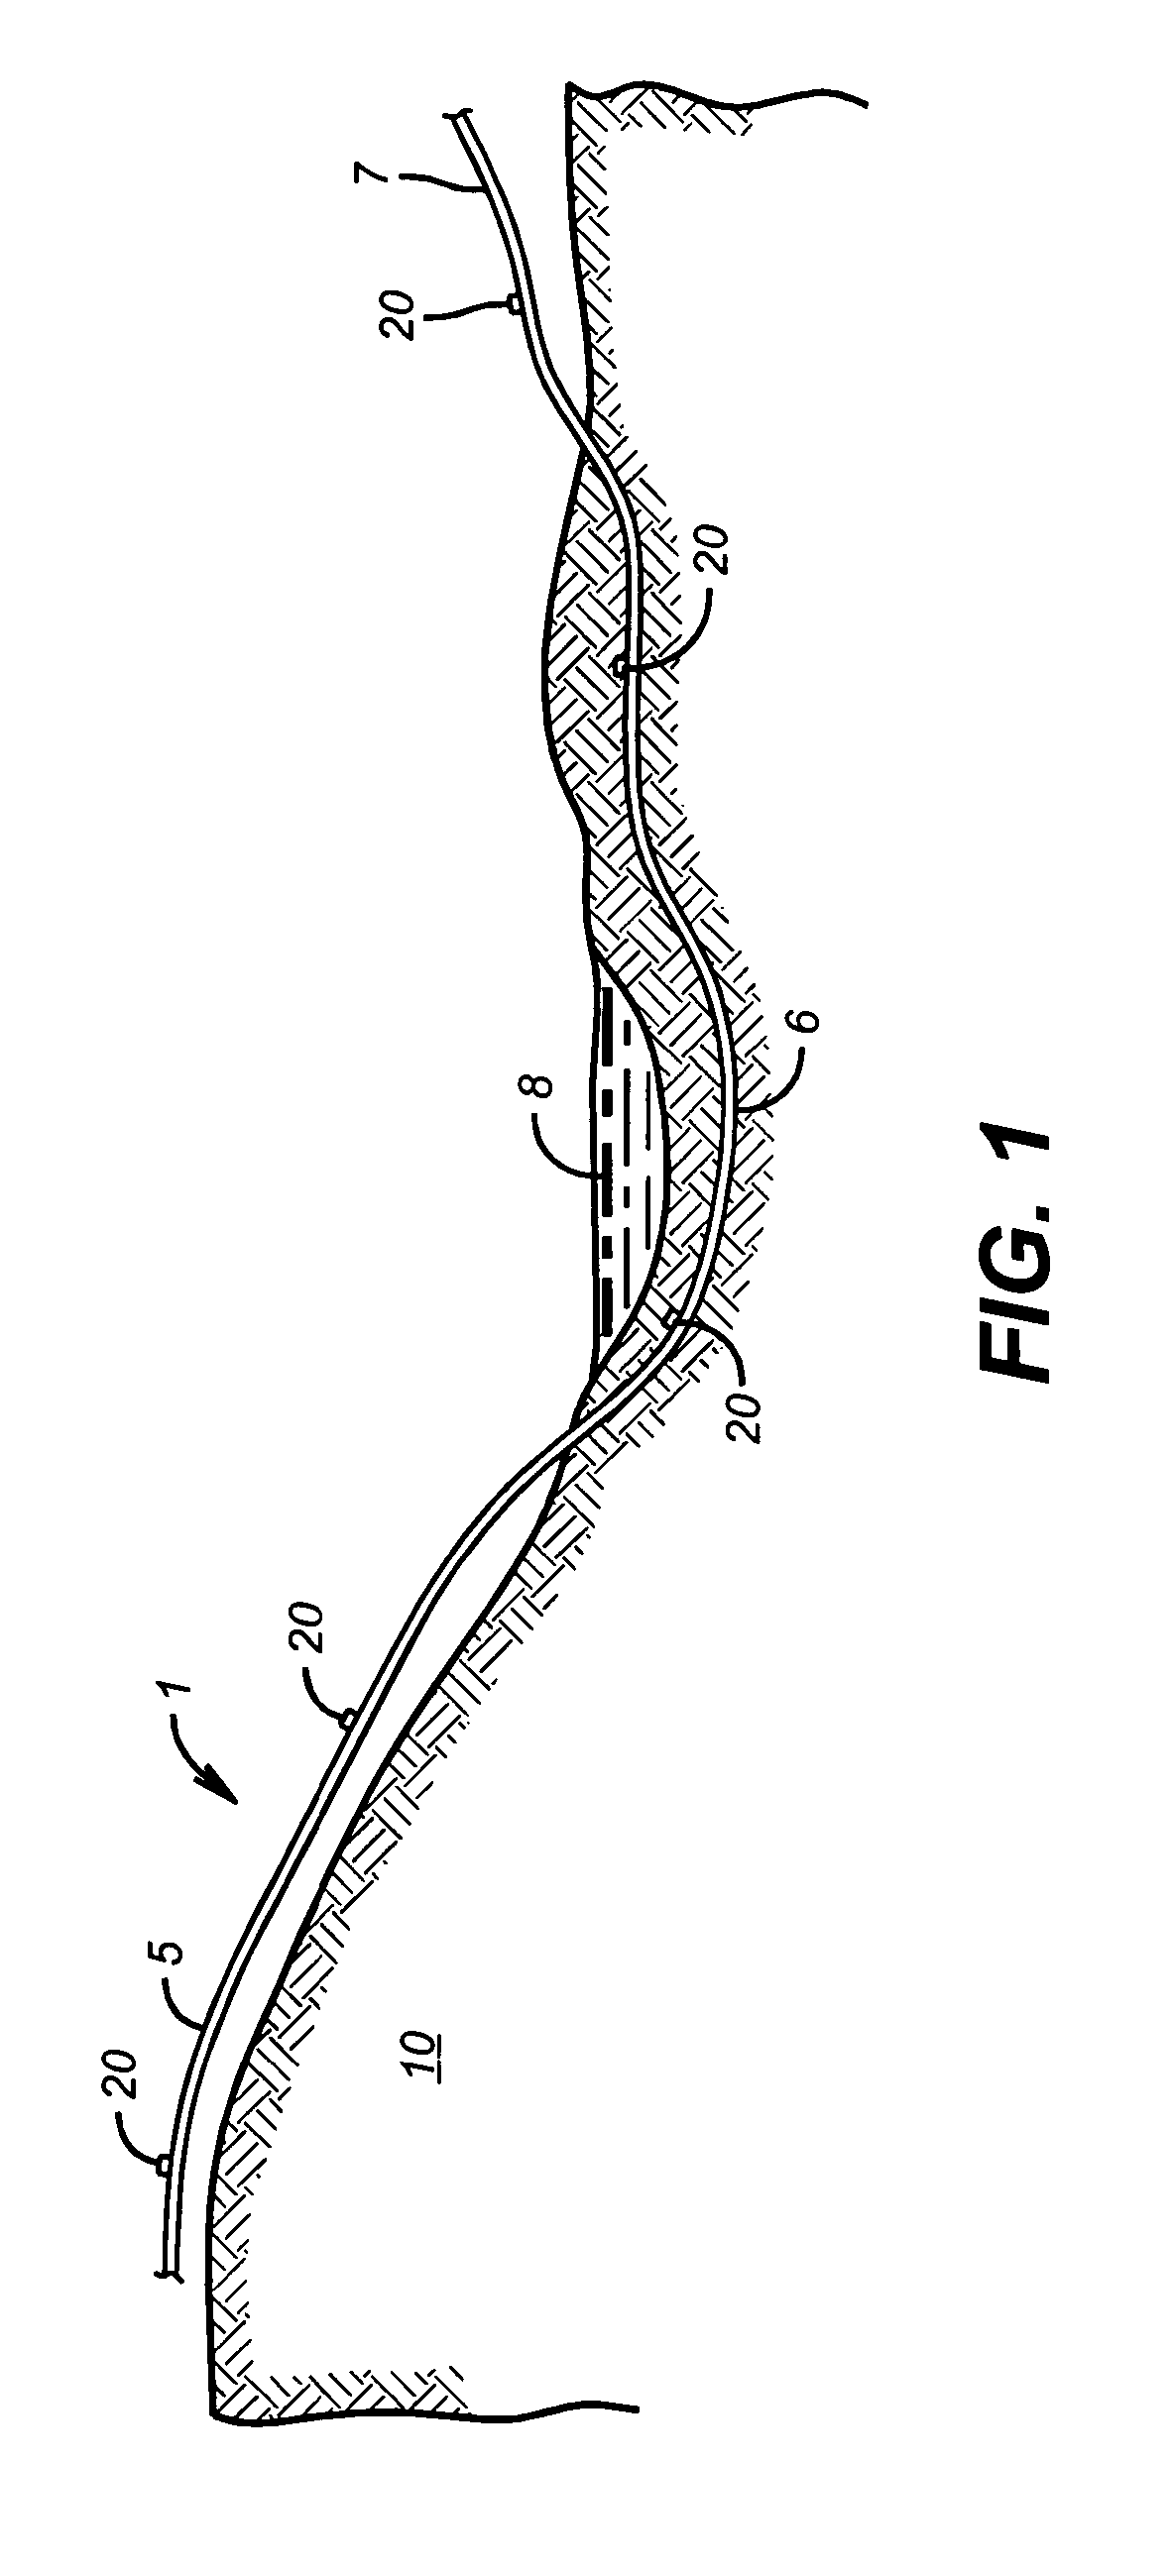 Apparatus and methods for monitoring pipelines